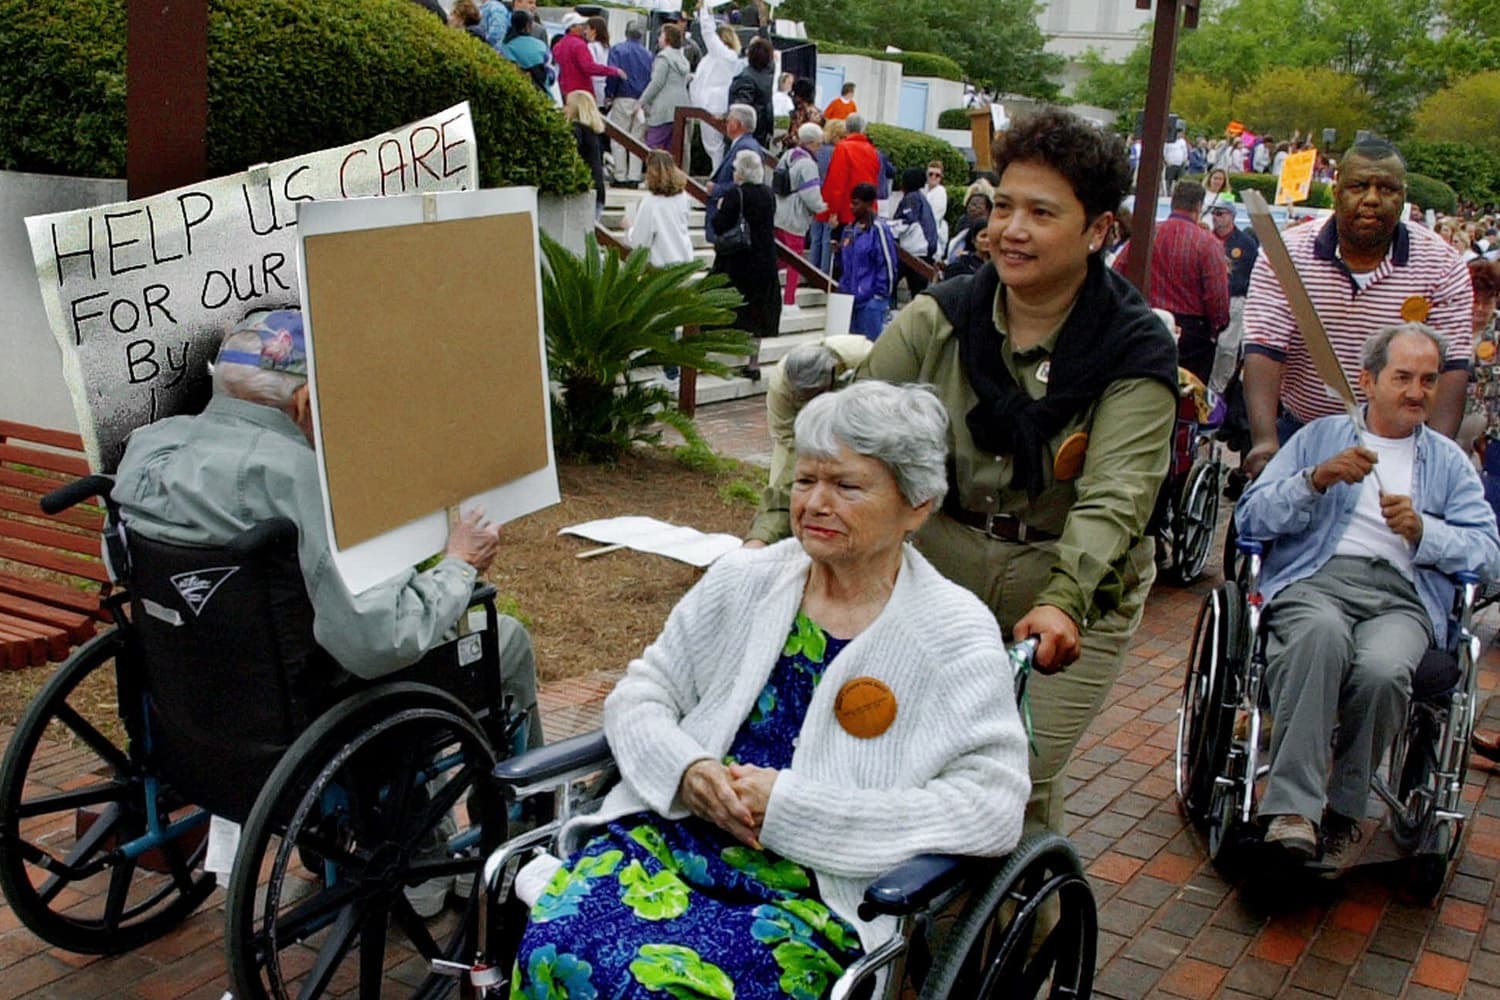 Elderly citizens in wheelchairs head toward the Capitol as long-term care residents, family and caregivers rally on the Capitol steps for litigation reform for eldercare facilities Wednesday, March 28, 2001, in Tallahassee, Fla. (Mark Foley/AP)